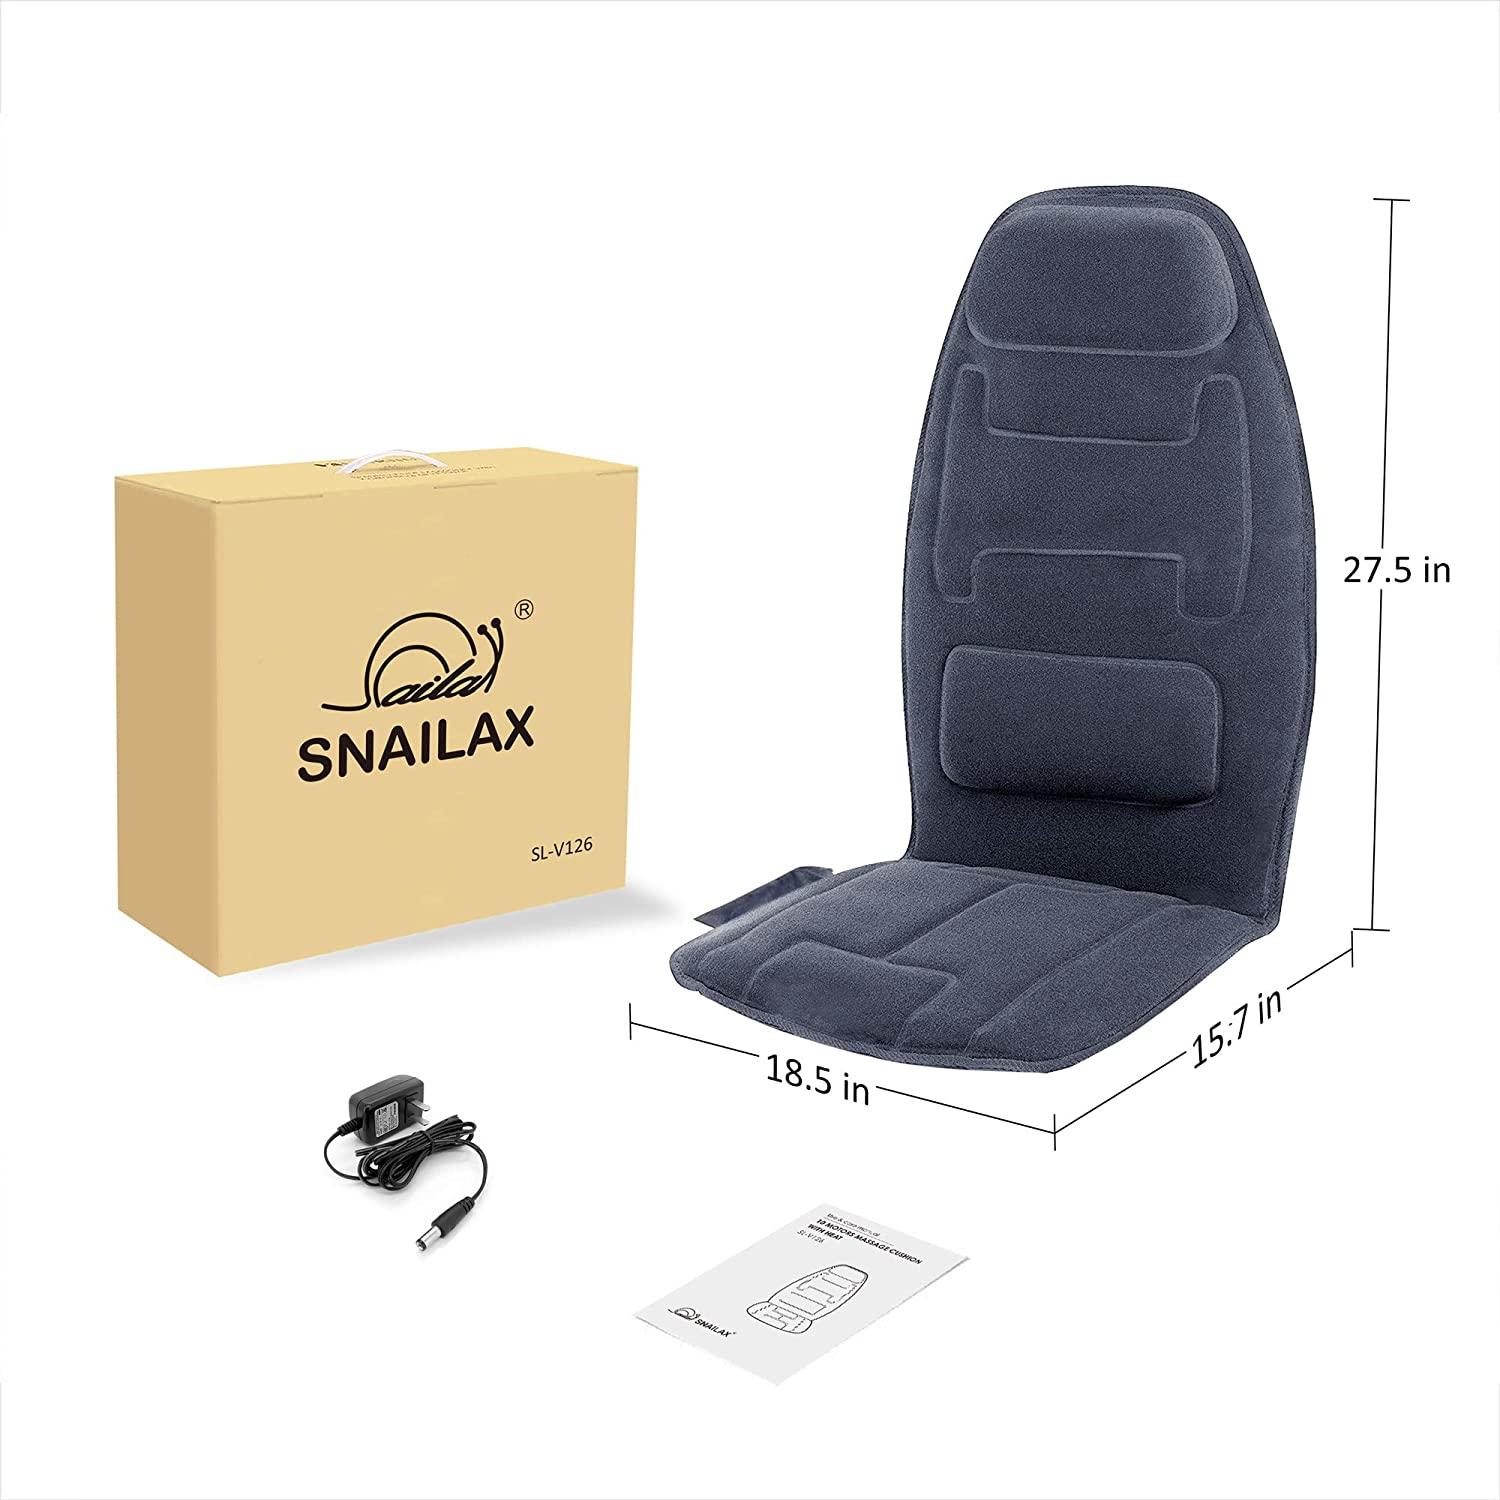 Snailax Massage Seat Cushion with Heat - Memory Foam Support Pad in Neck  and Lumbar,2 Heat Levels, 10 Vibration Massage Motors, Back Massager, Massage  Chair Pad for Home Office Navy Blue